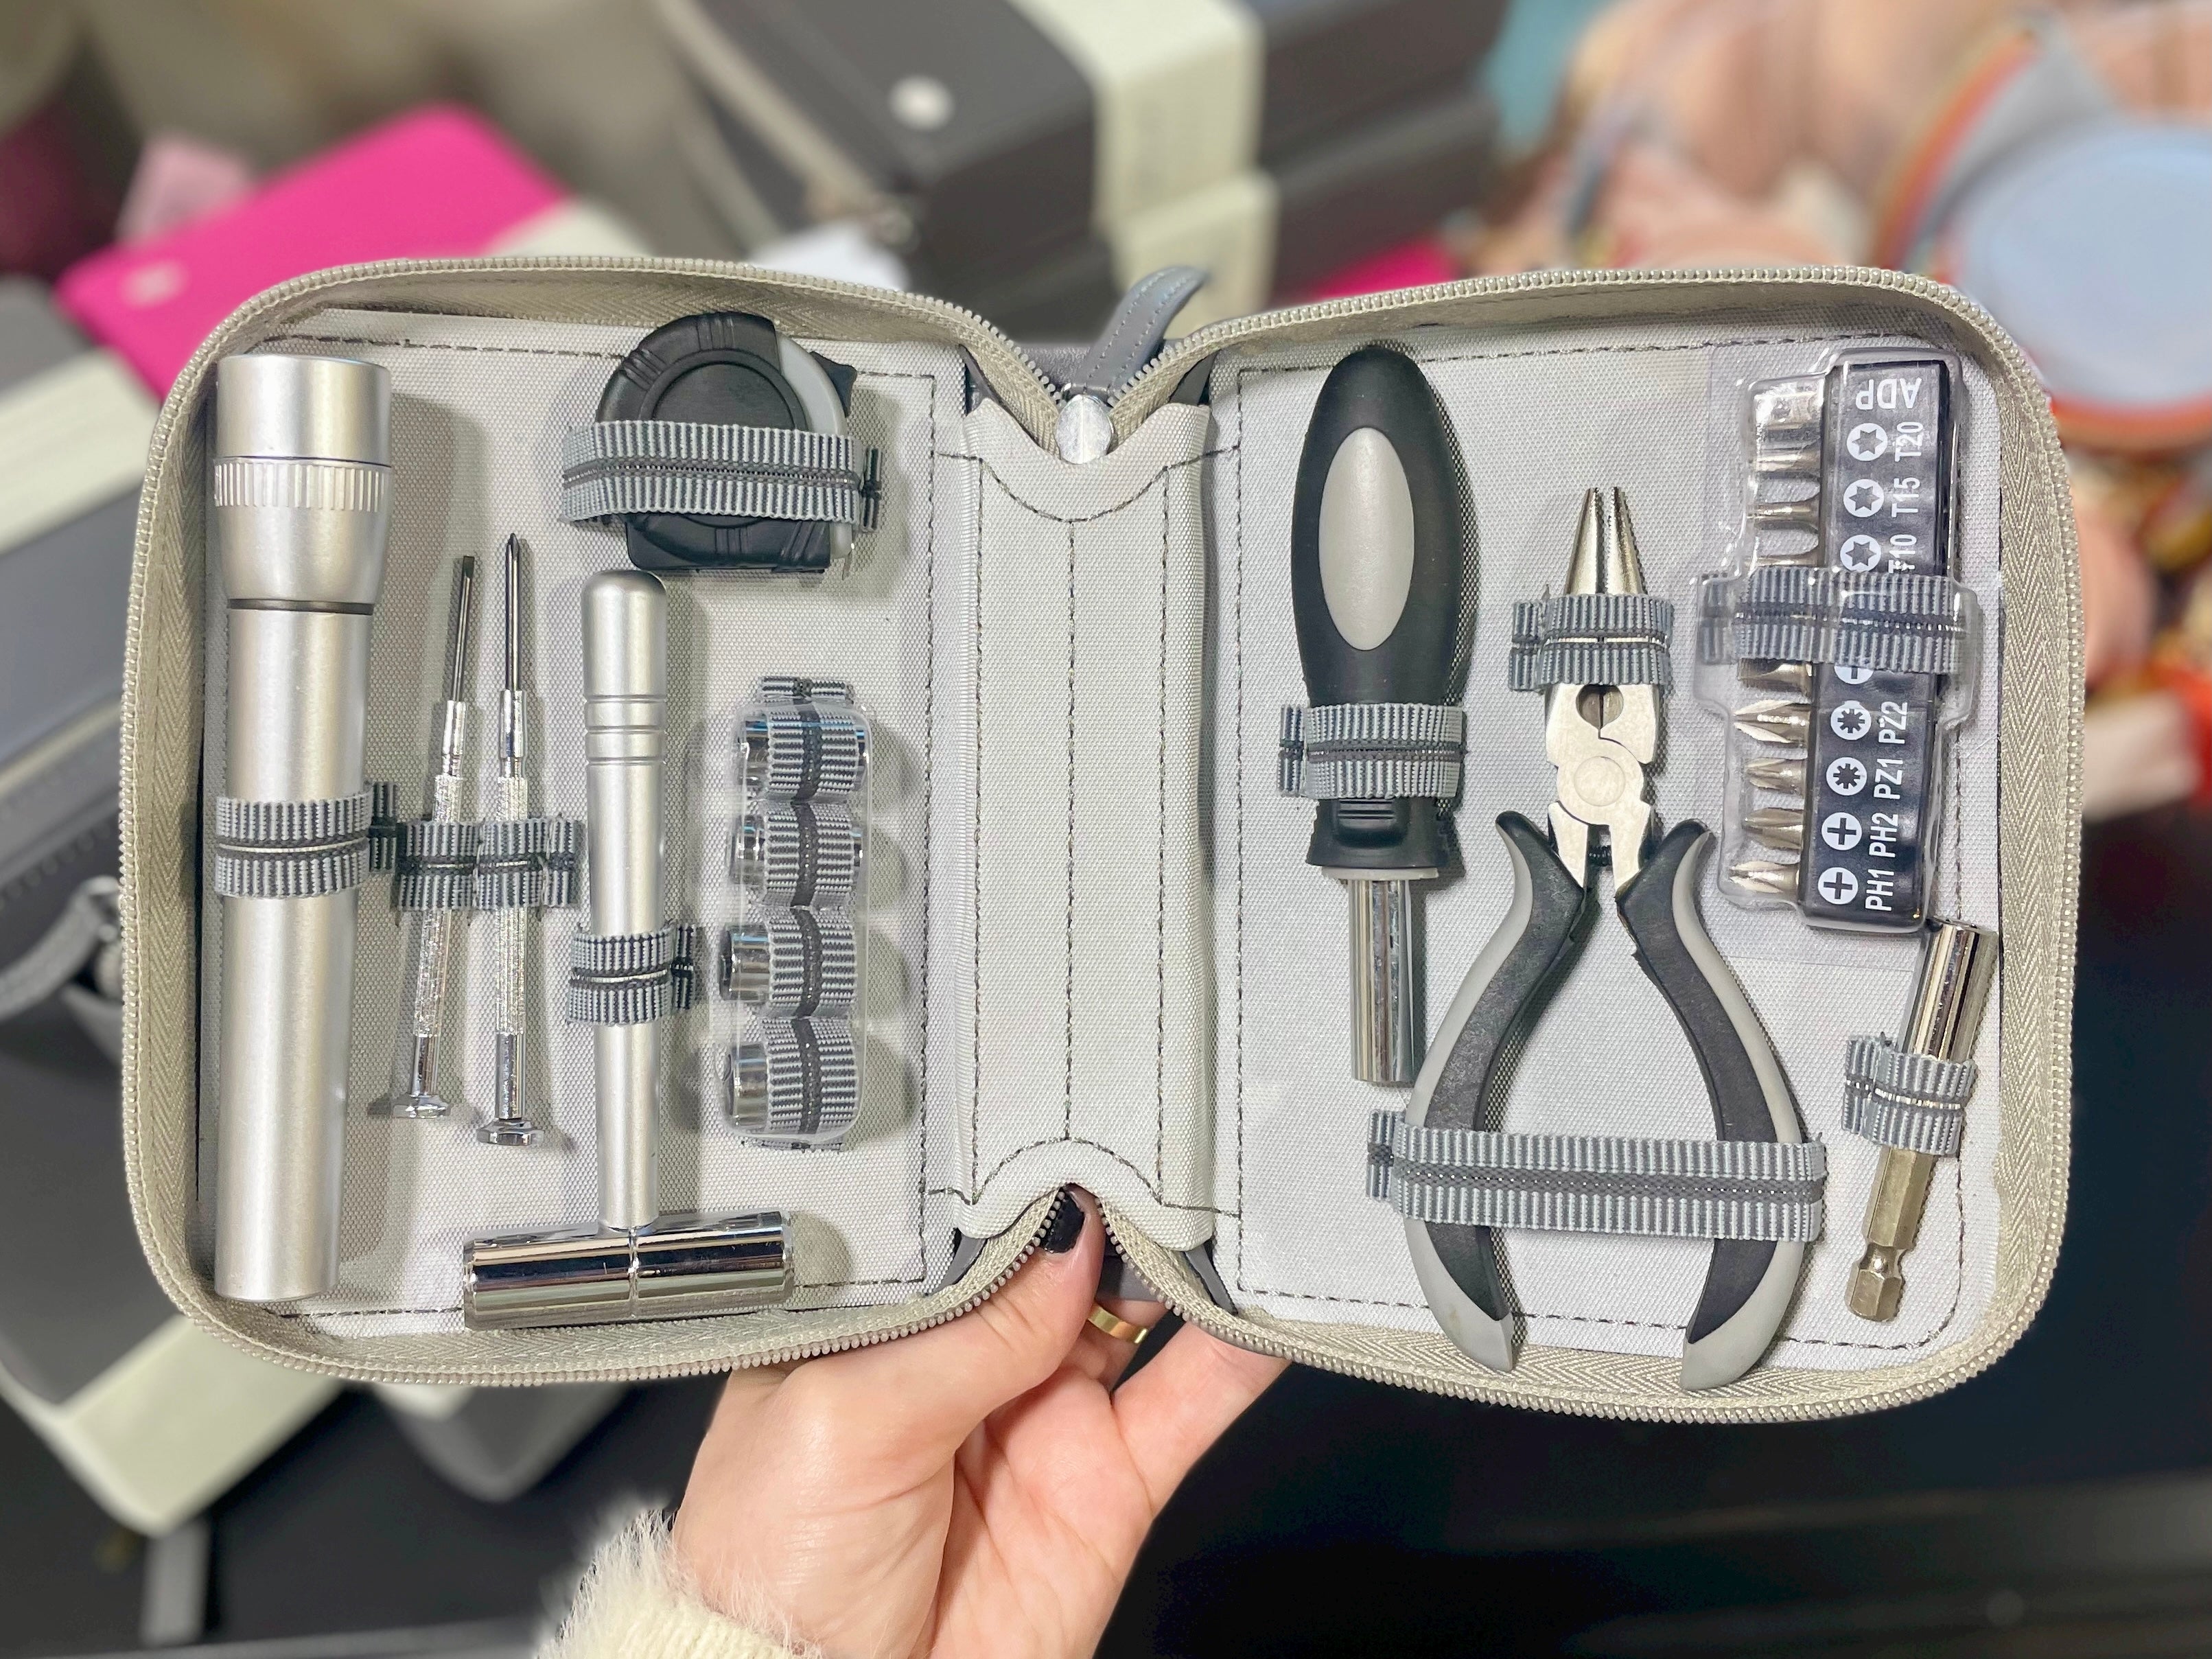 22-in-One Toolkit for Her